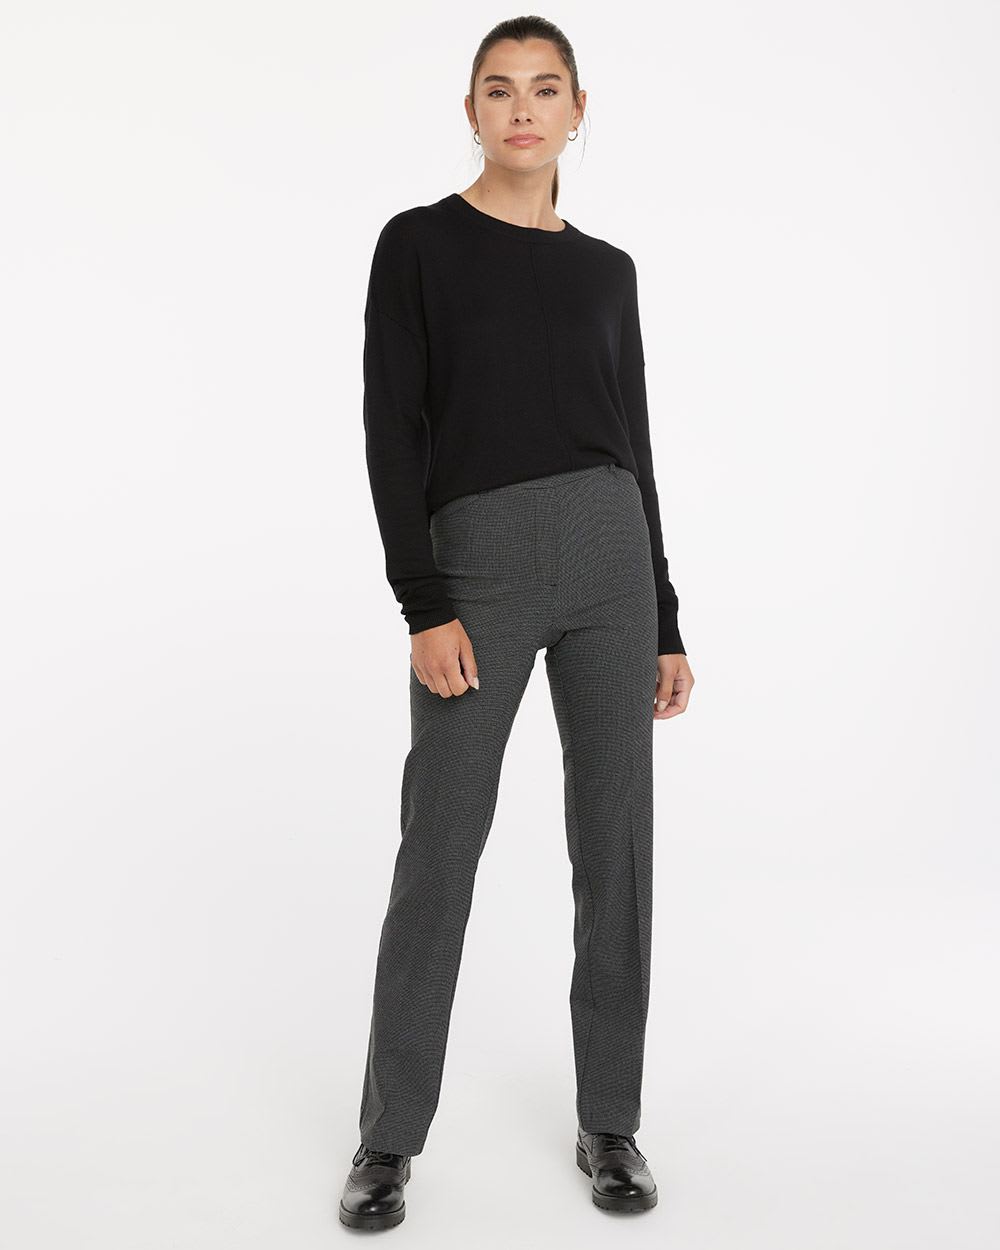 Grey Houndstooth Straight Leg Pants, The Iconic - Tall